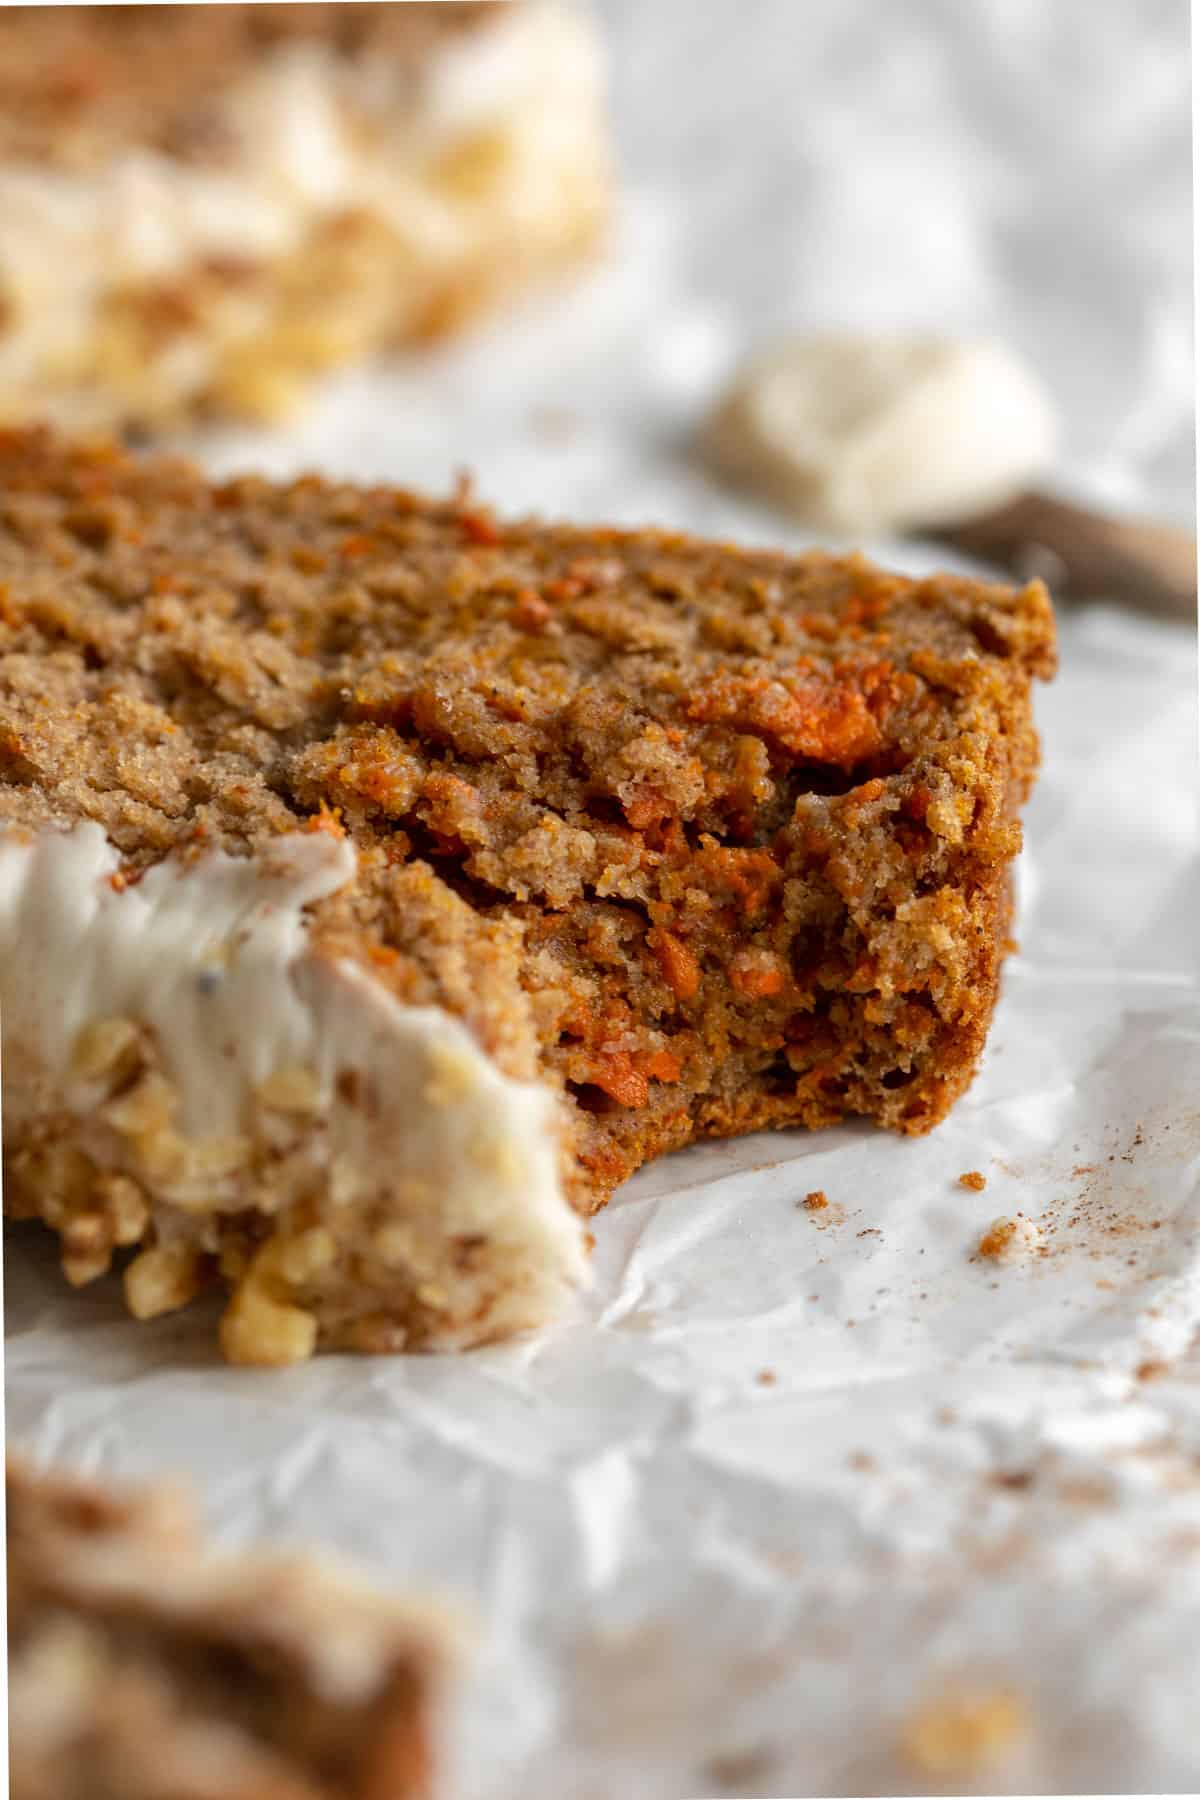 up close of the carrot cake banana bread to show texture